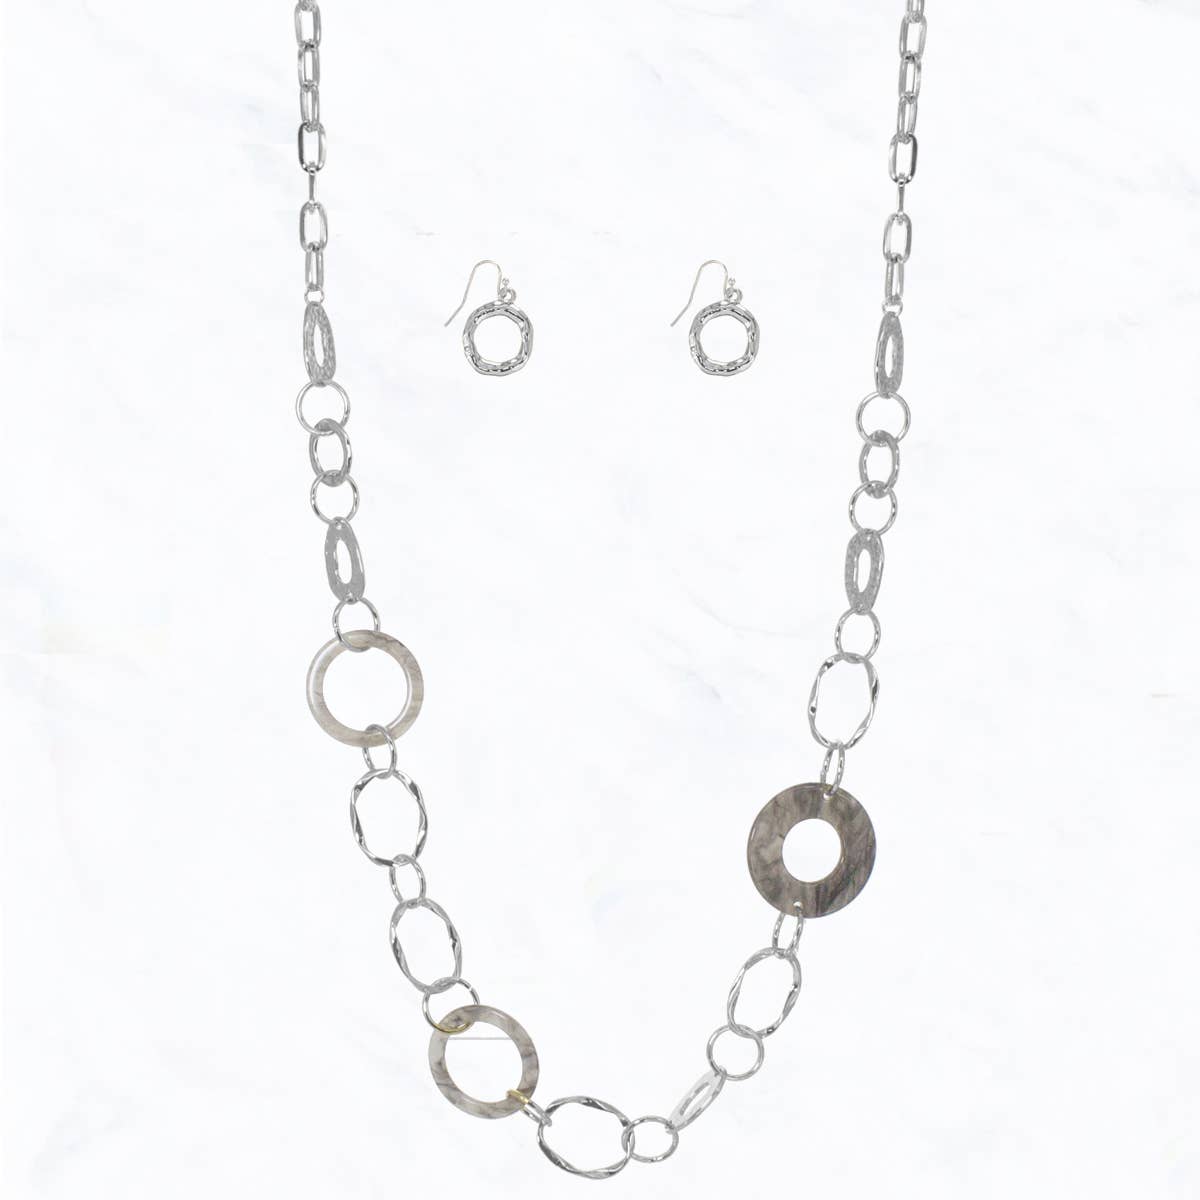 Cut-Out Circle Resin, Metal Link Chain Toggle Long Necklace